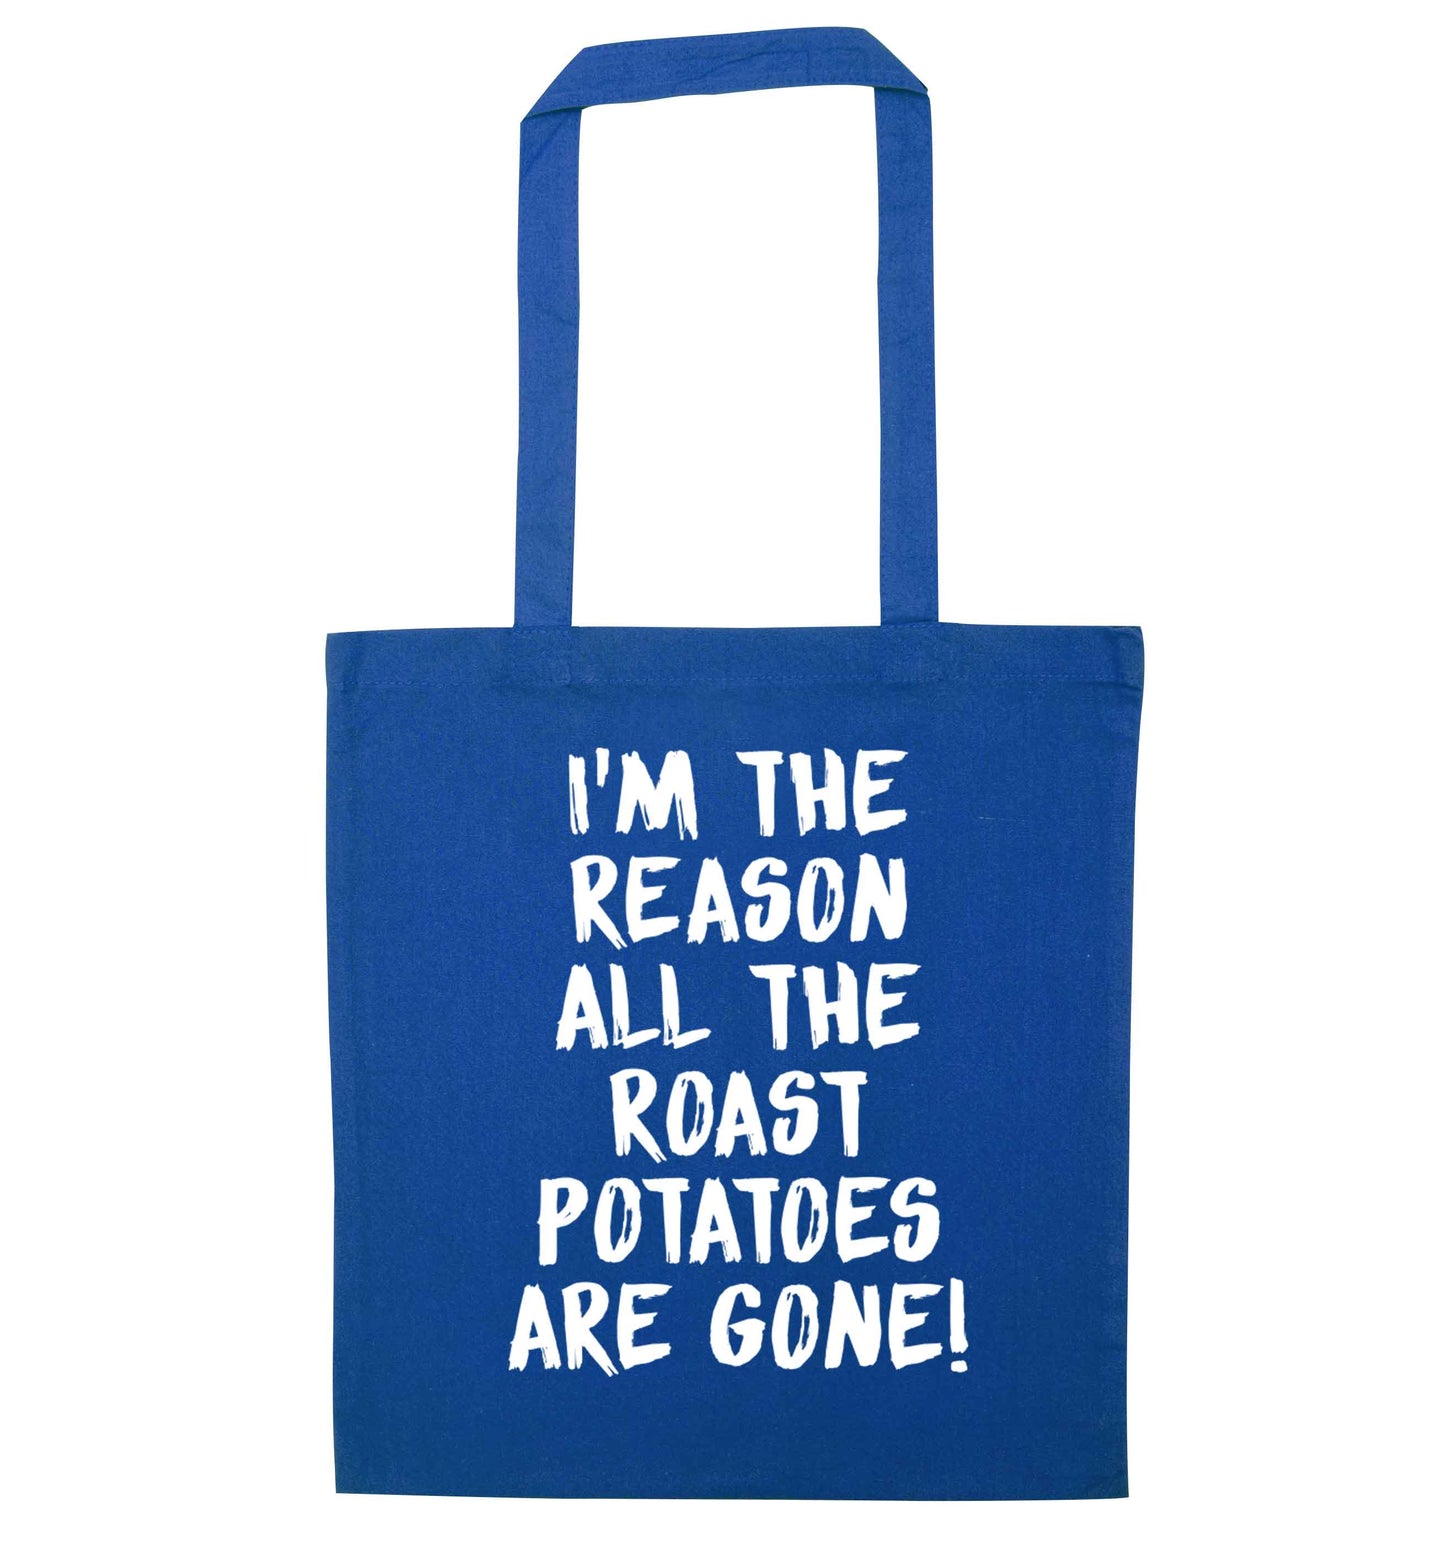 I'm the reason all the roast potatoes are gone blue tote bag